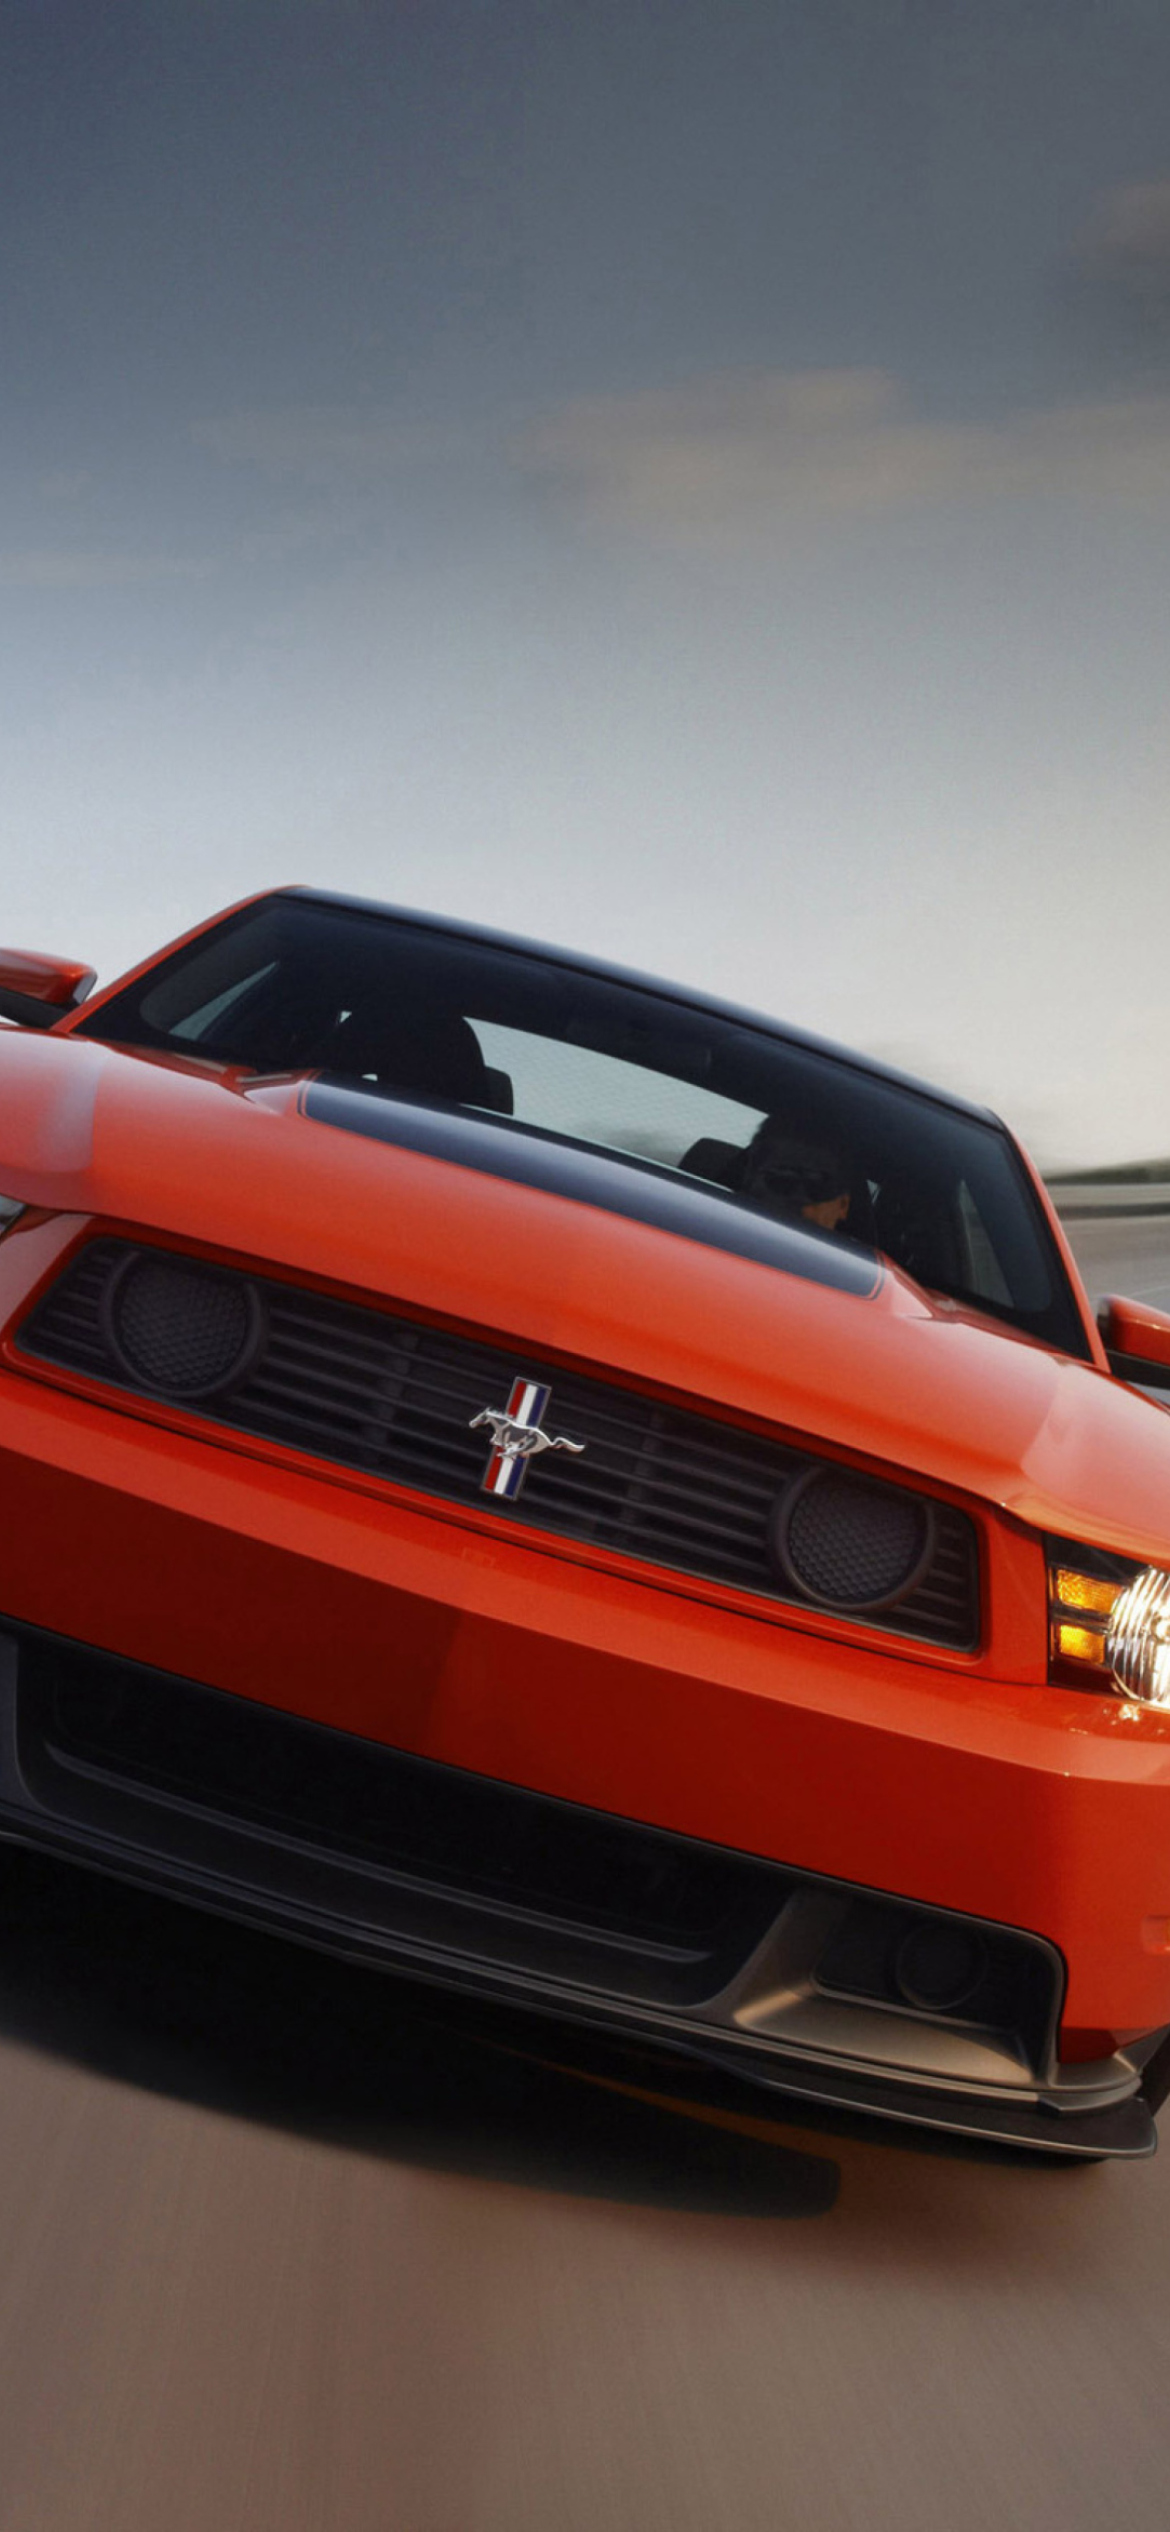 Red Cars Ford Mustang wallpaper 1170x2532